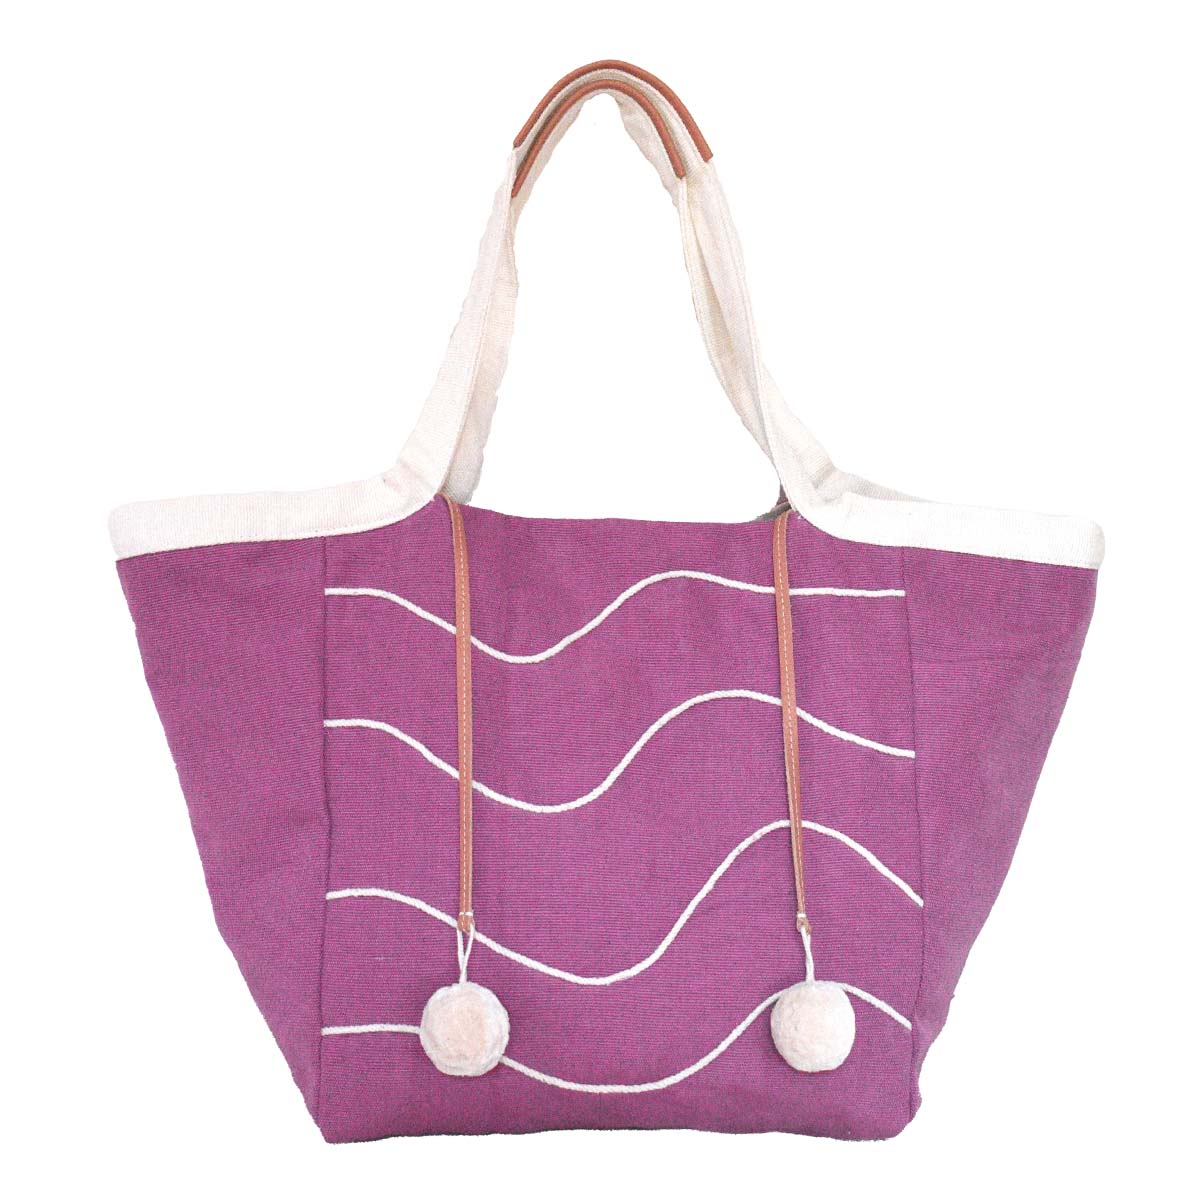 The front of the hand woven artisan Rosa Tote in Cosmic Waves pattern. It has a magenta solid background with thin wavy white stripes. It has leather lined handles and two white pompoms attached to leather cords.